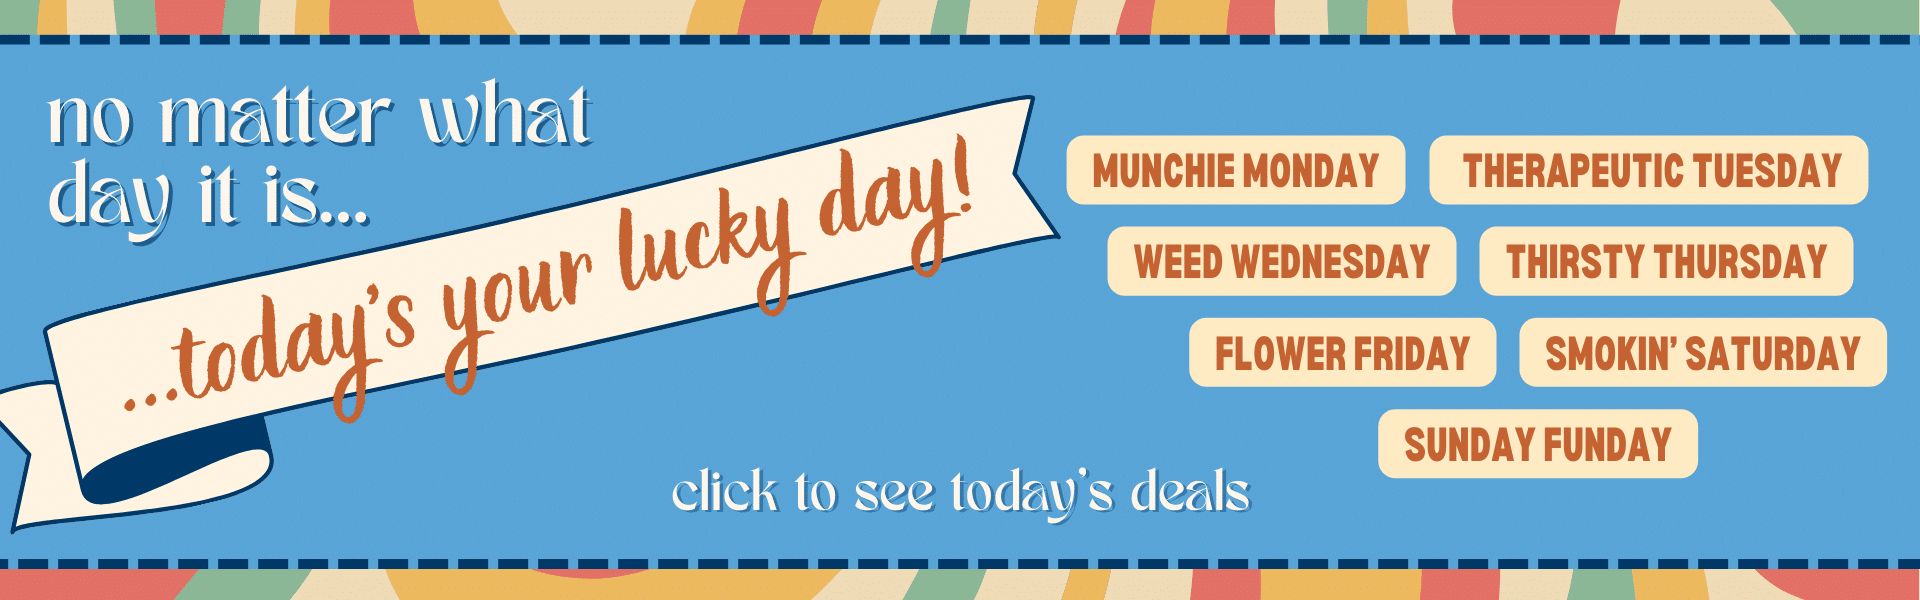 Abstract retro graphic with text that reads: No matter what day it is, today's your lucky day. Munchie Monday, Therapeutic Tuesday, Weed Wednesday, Thirsty Thursday, Flower Friday, Smokin' Saturday, Sunday Funday. Click to see today's deals.